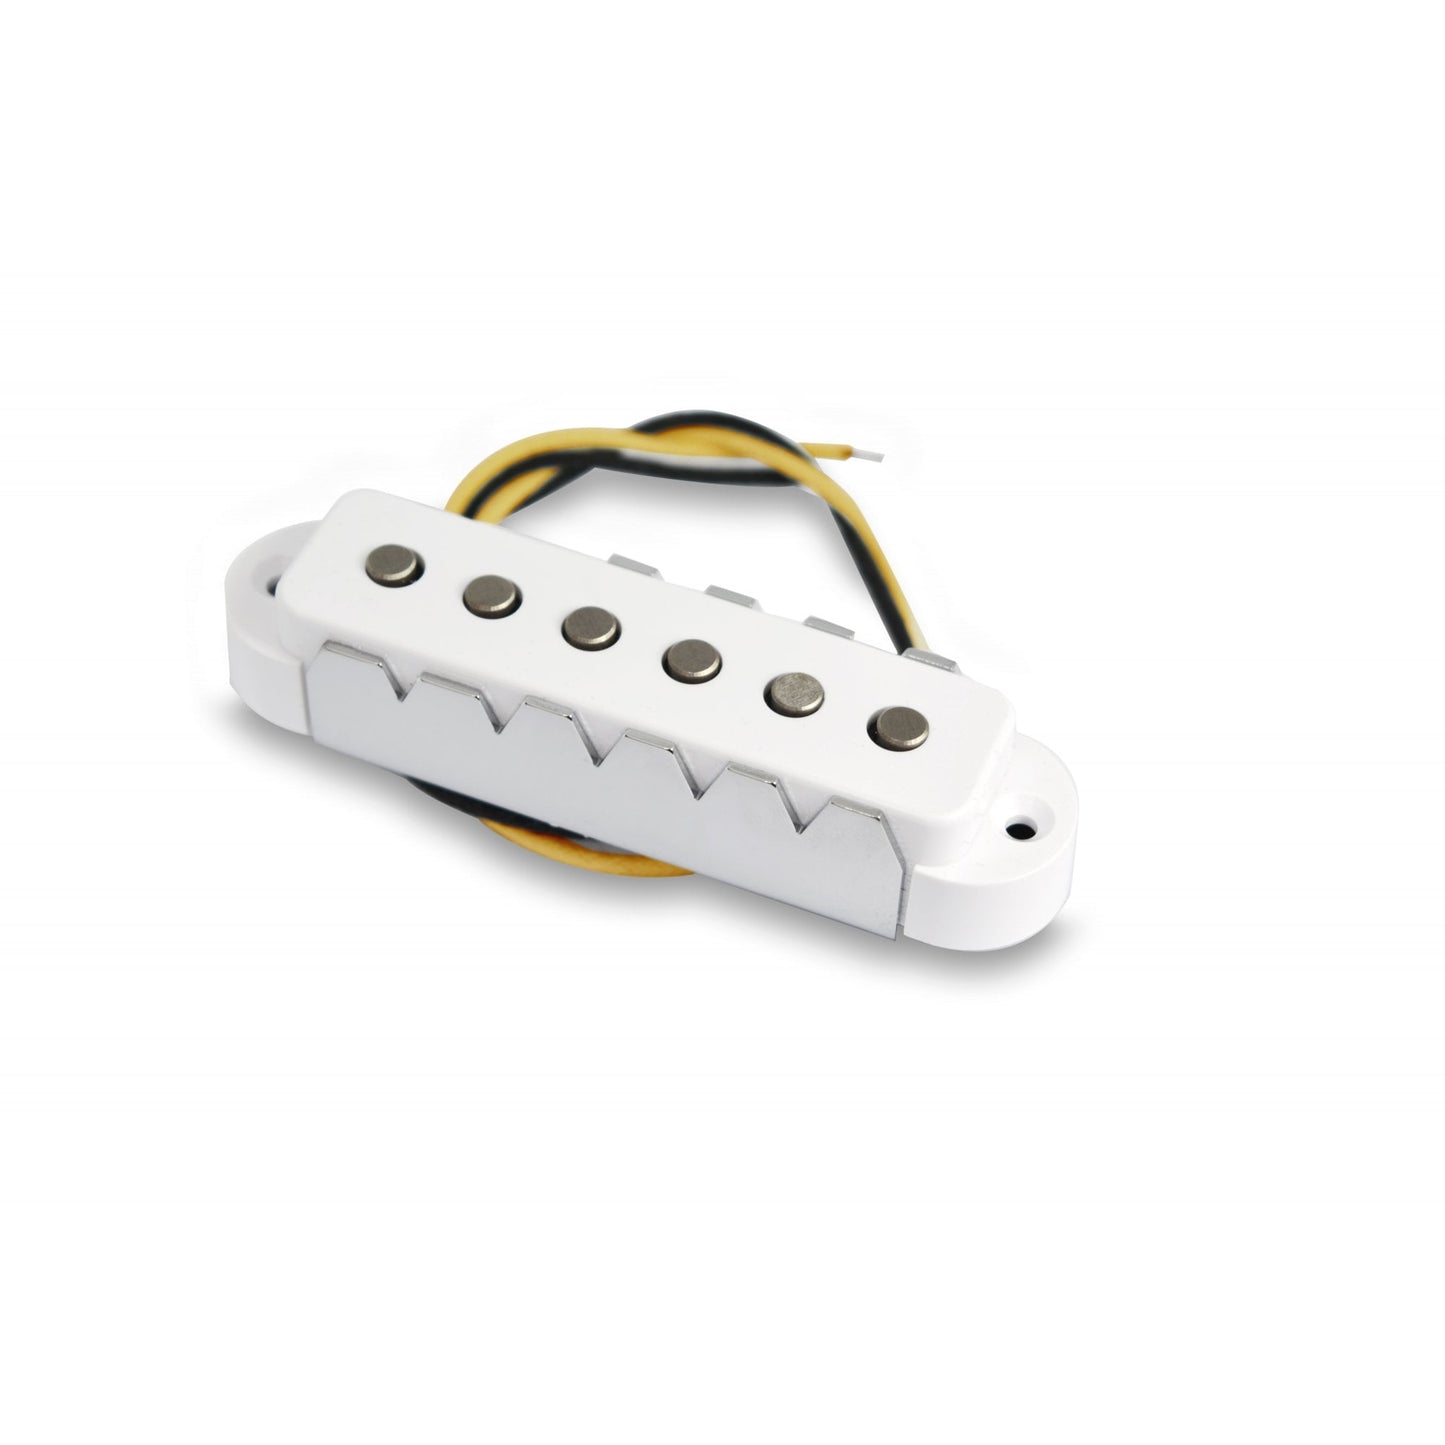 Icon 65 Jaguar Pickup (Alnico 3) - available for both Bridge and Neck Positions